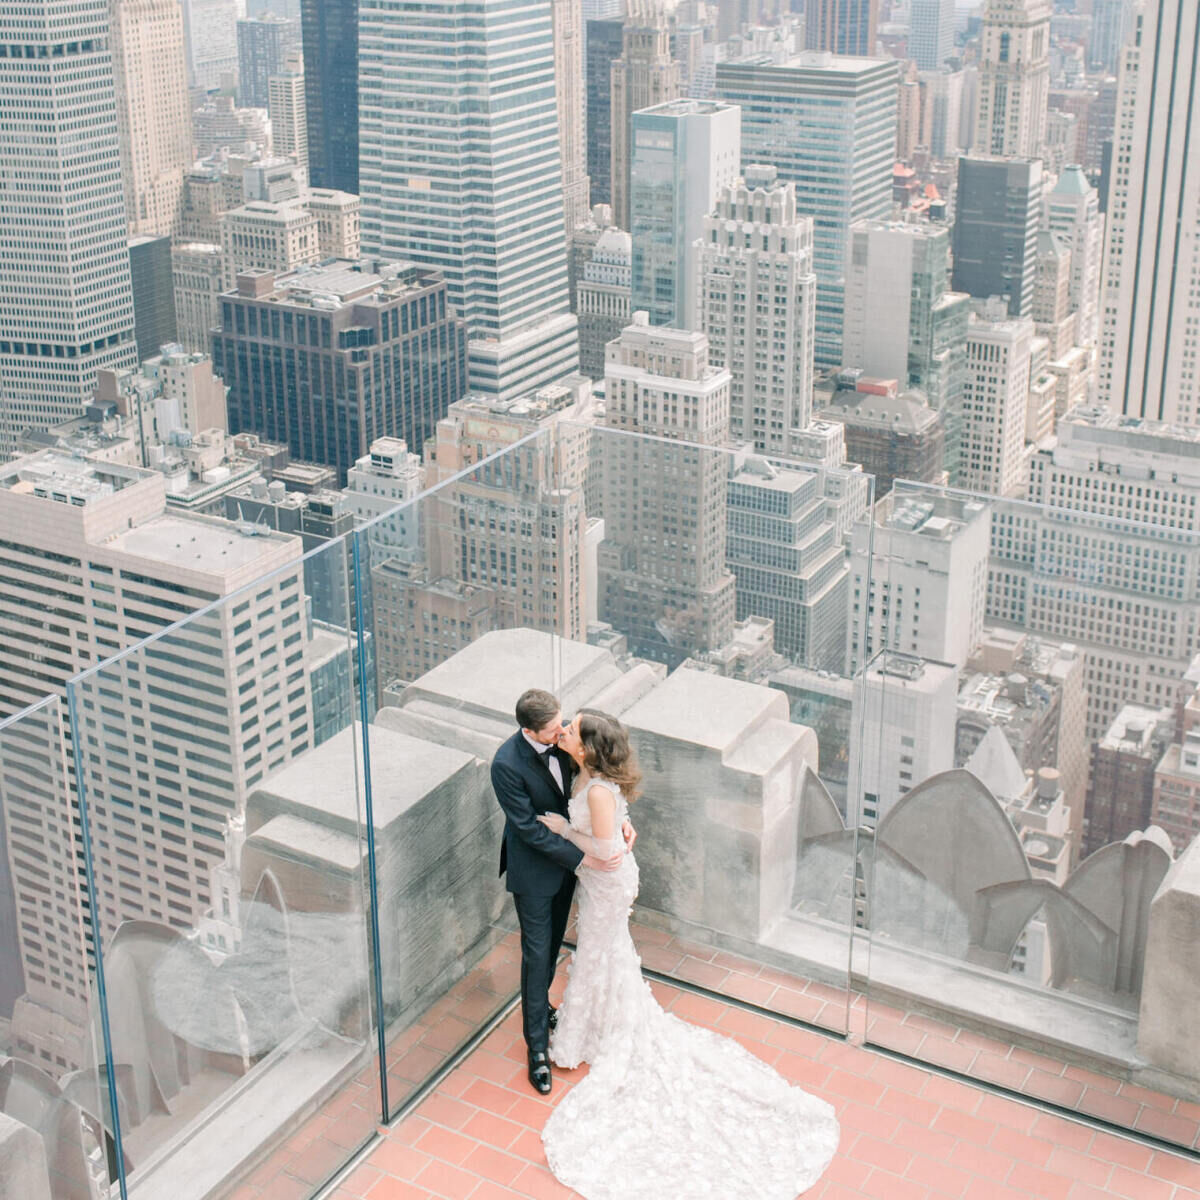 City Weddings: A couple posing on the rooftop at the Rainbow Room with New York City skyscrapers behind them.